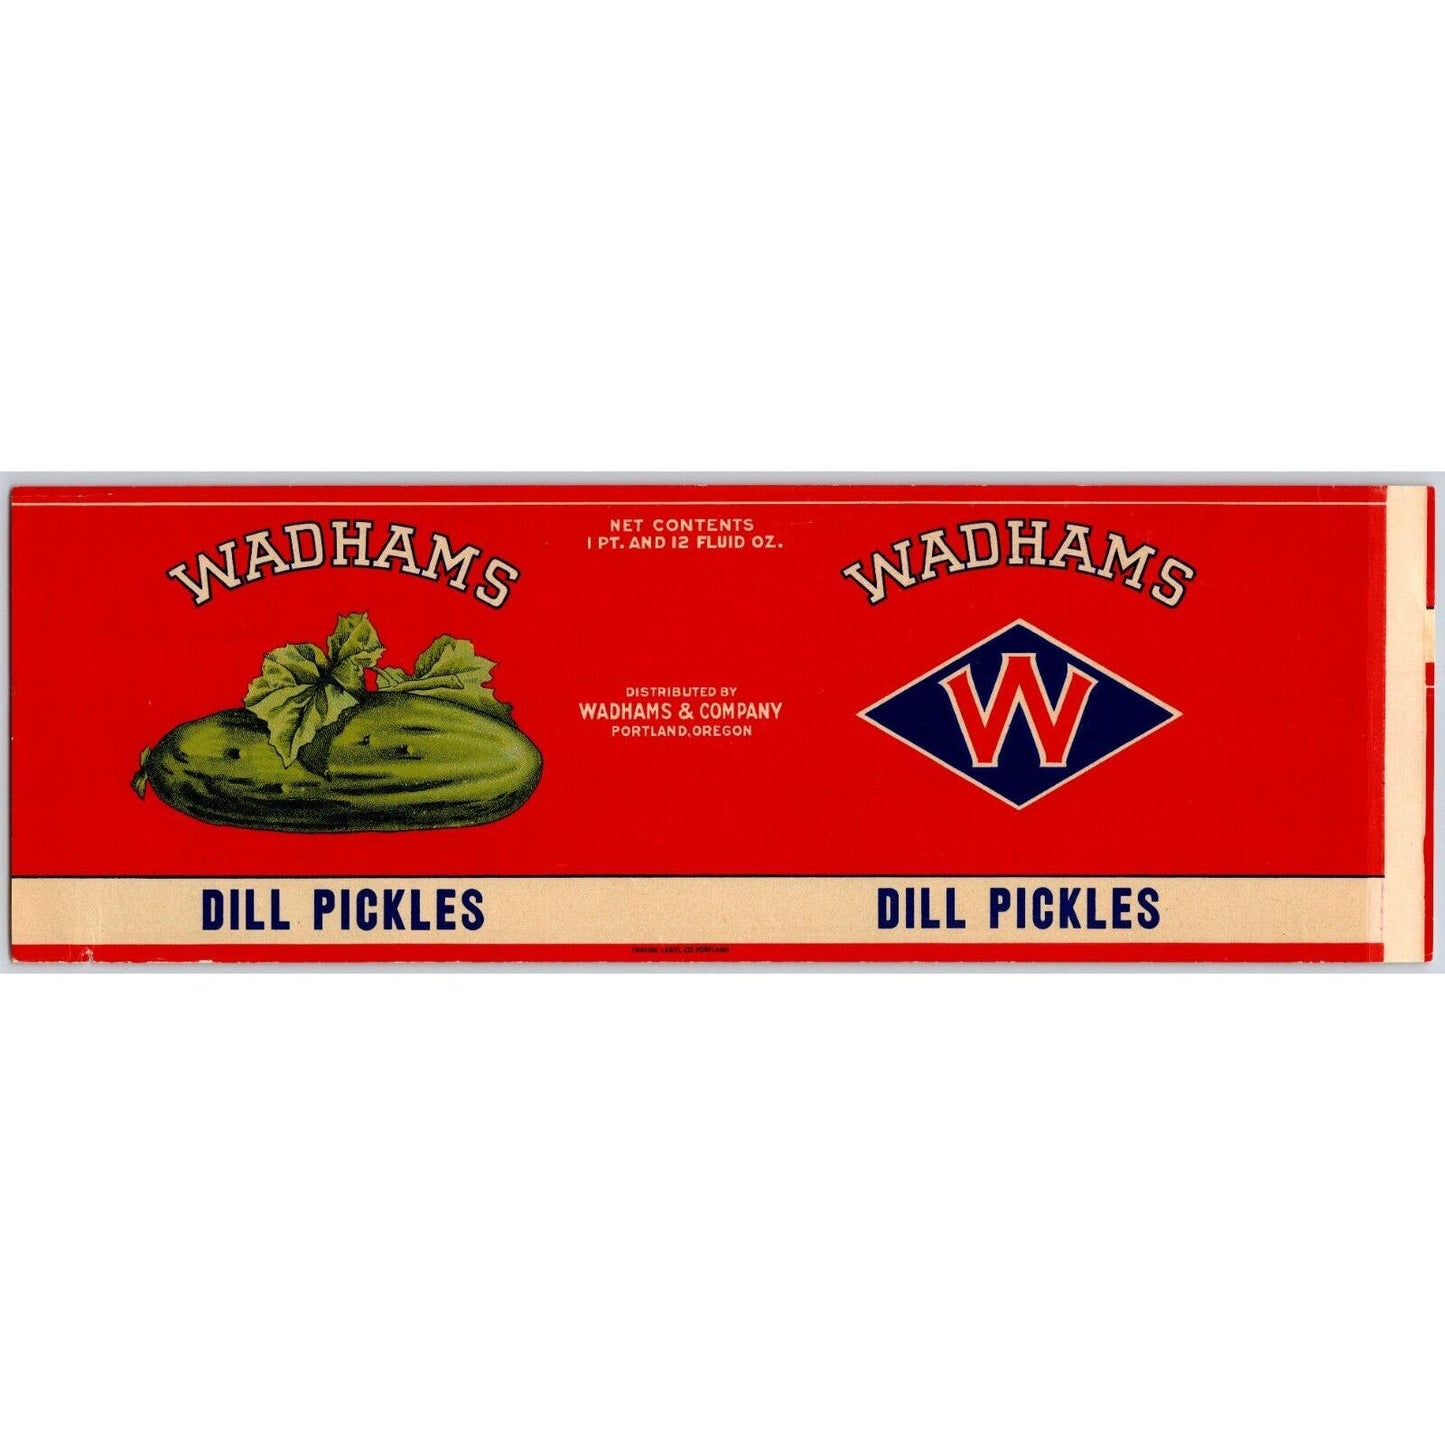 Wadhams Dill Pickles Paper Can Label Portland, OR c1920's-30's VGC Scarce